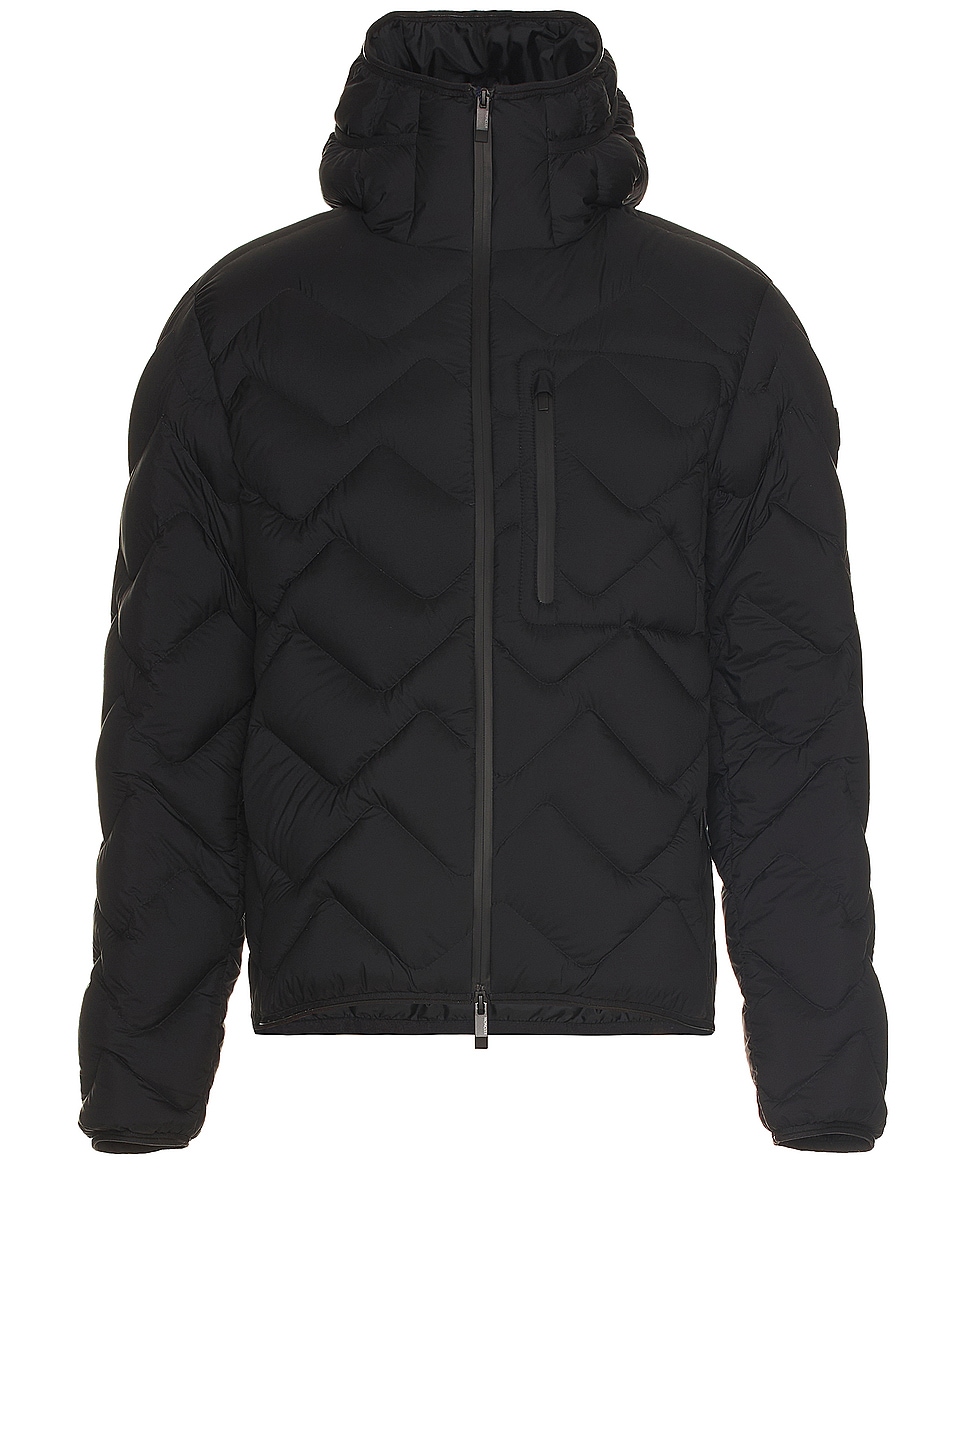 Image 1 of Moncler Steliere Jacket in Black